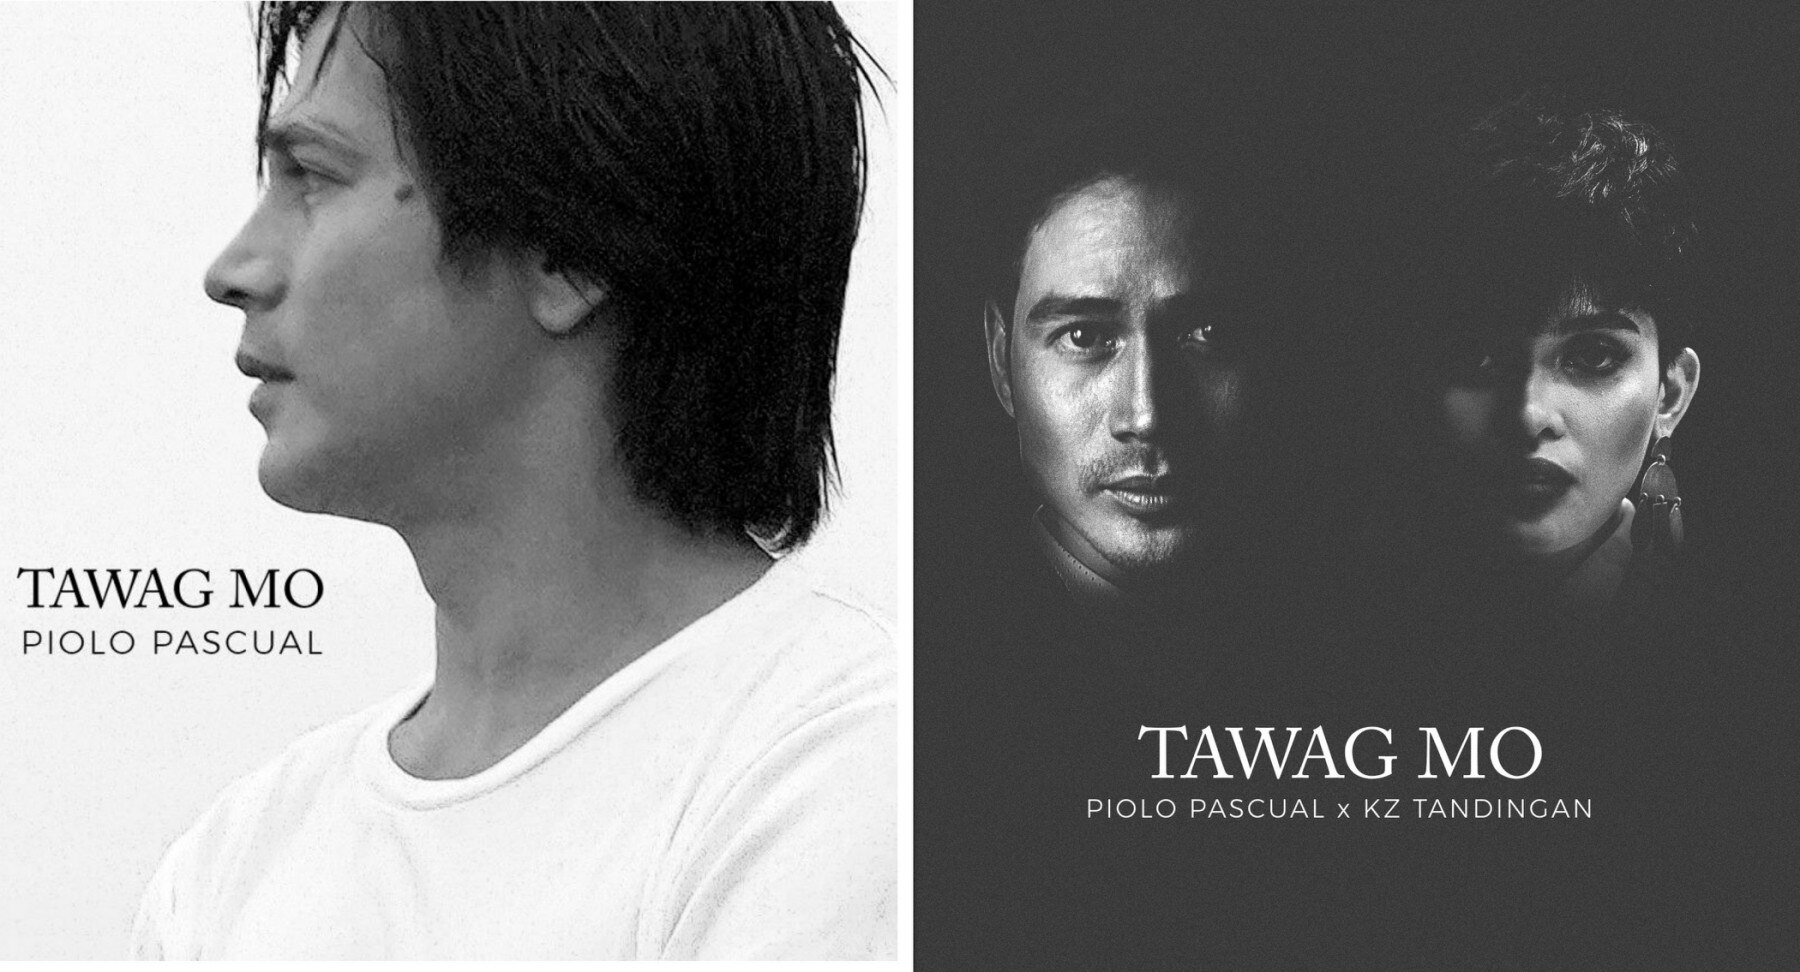 Piolo agonizes over heartbreak in new song “Tawag Mo”; collaborates with KZ for the duet version